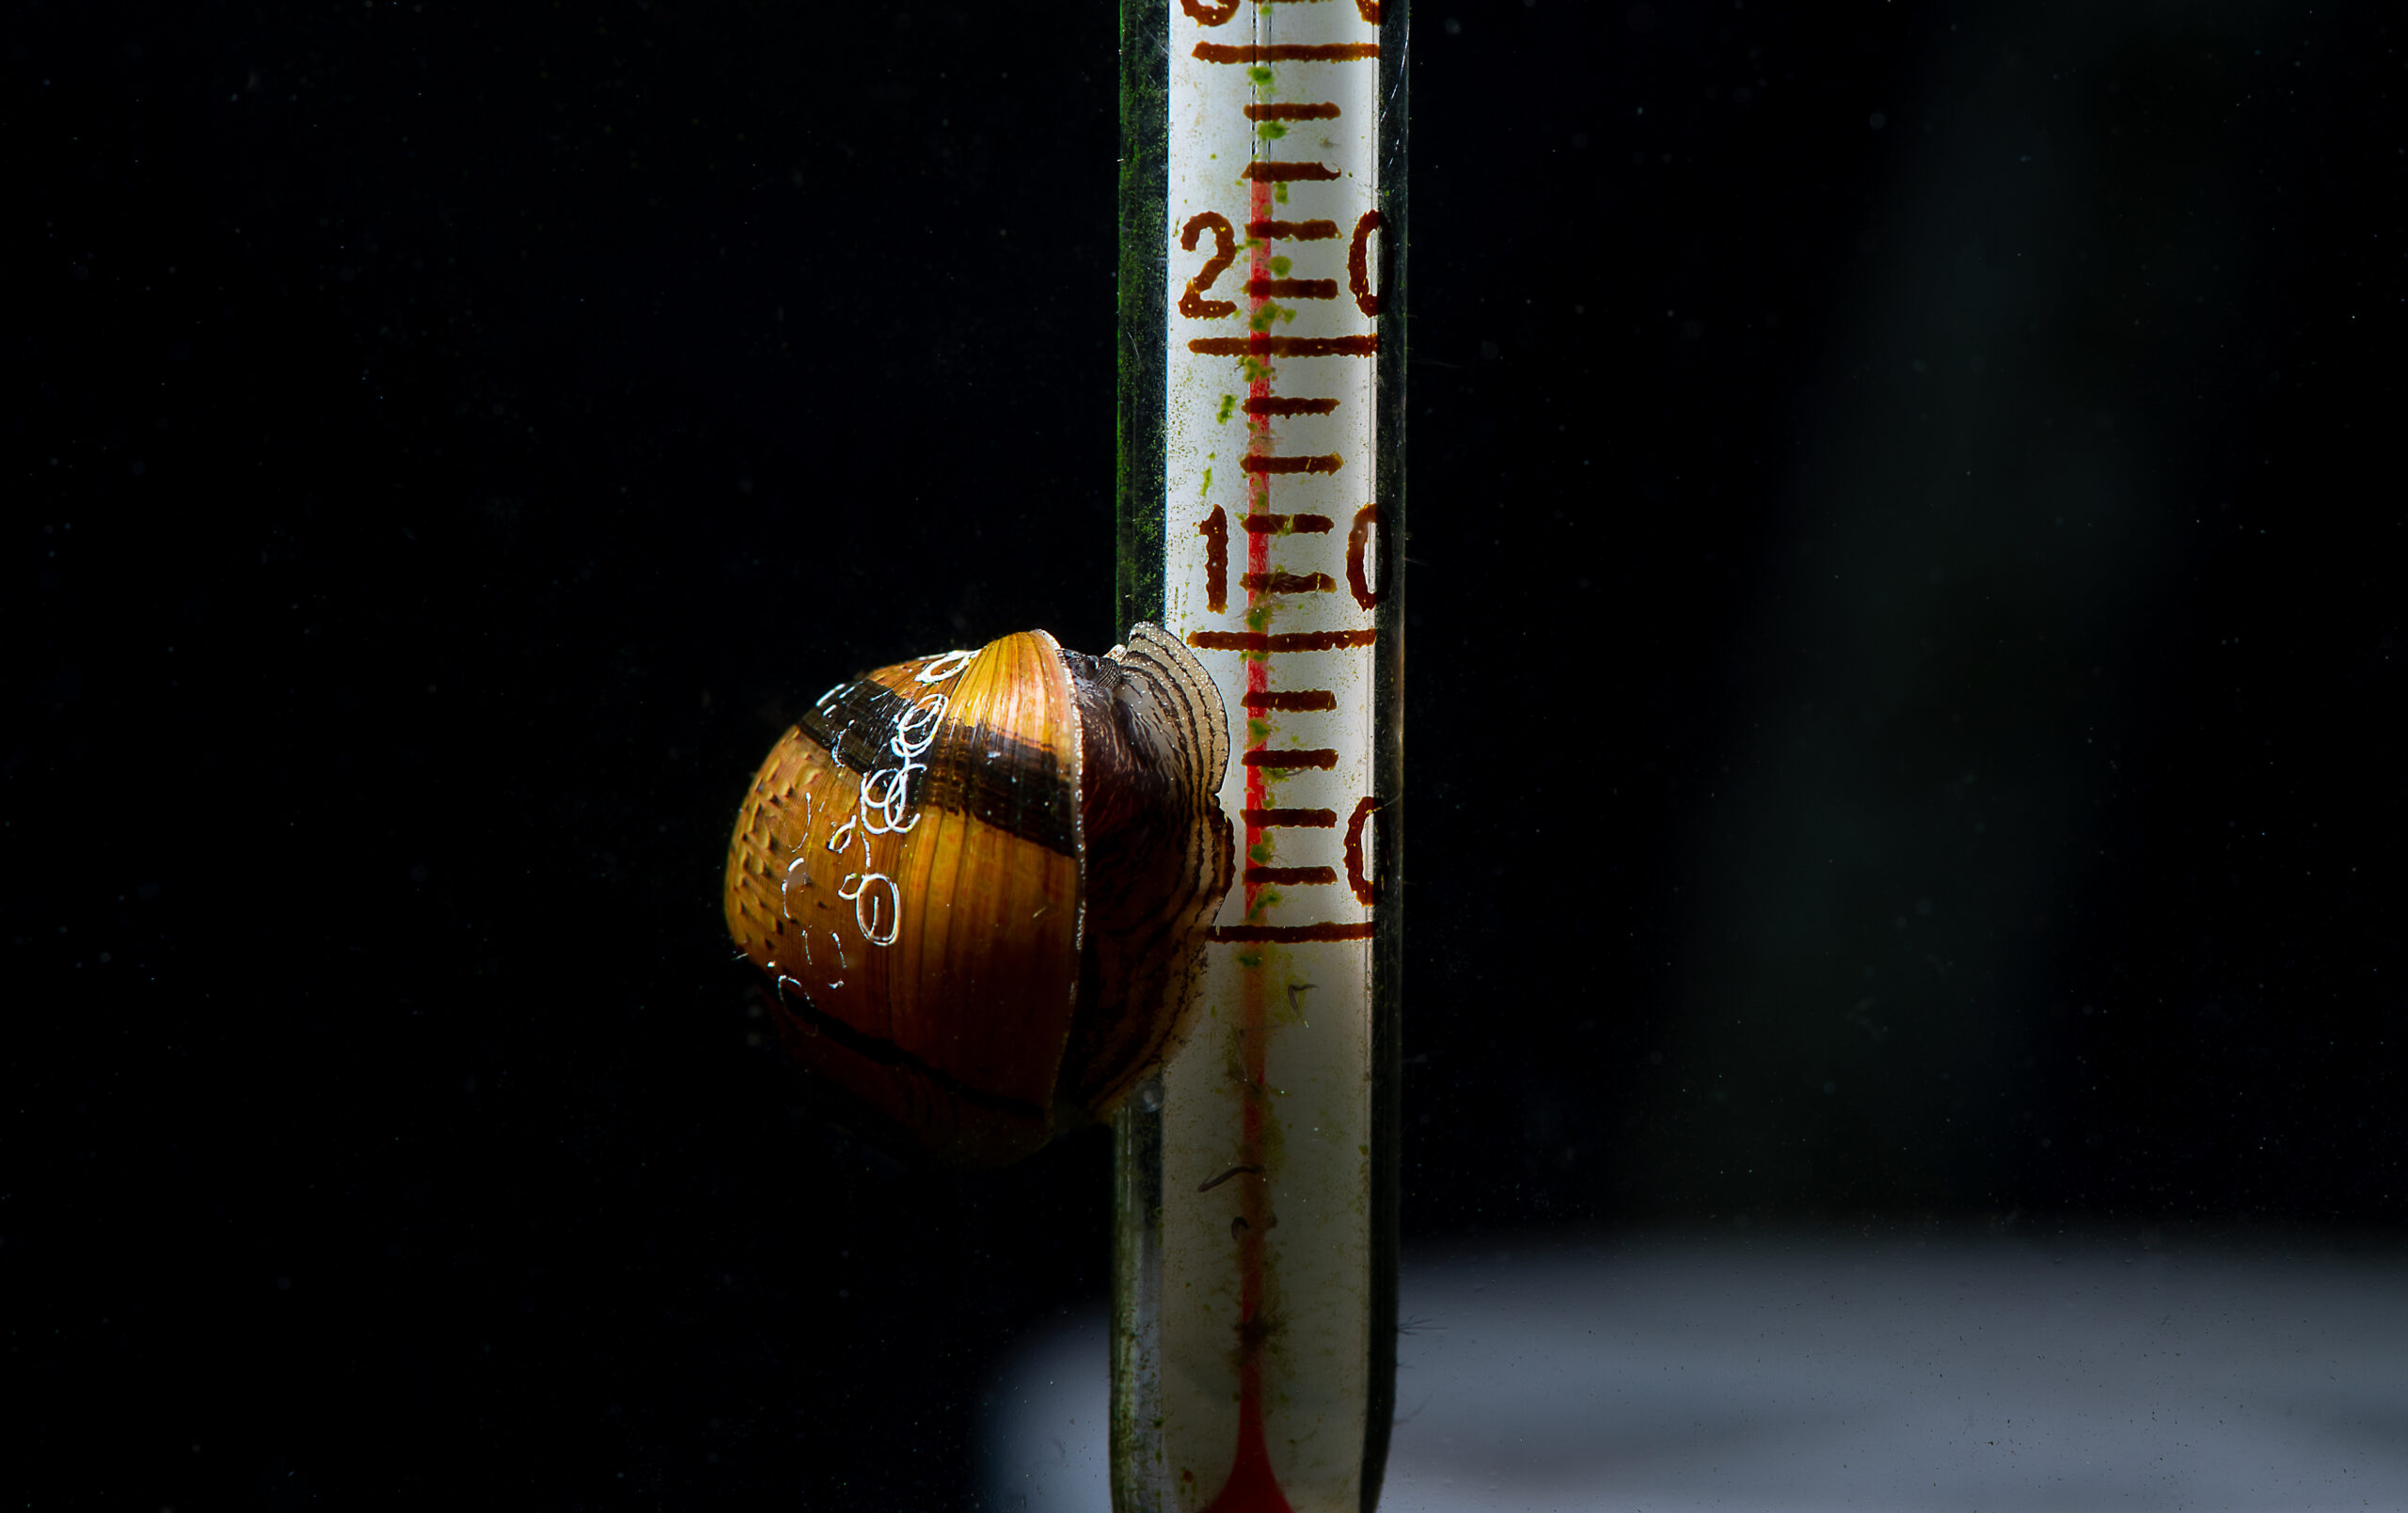 snail on the thermometer